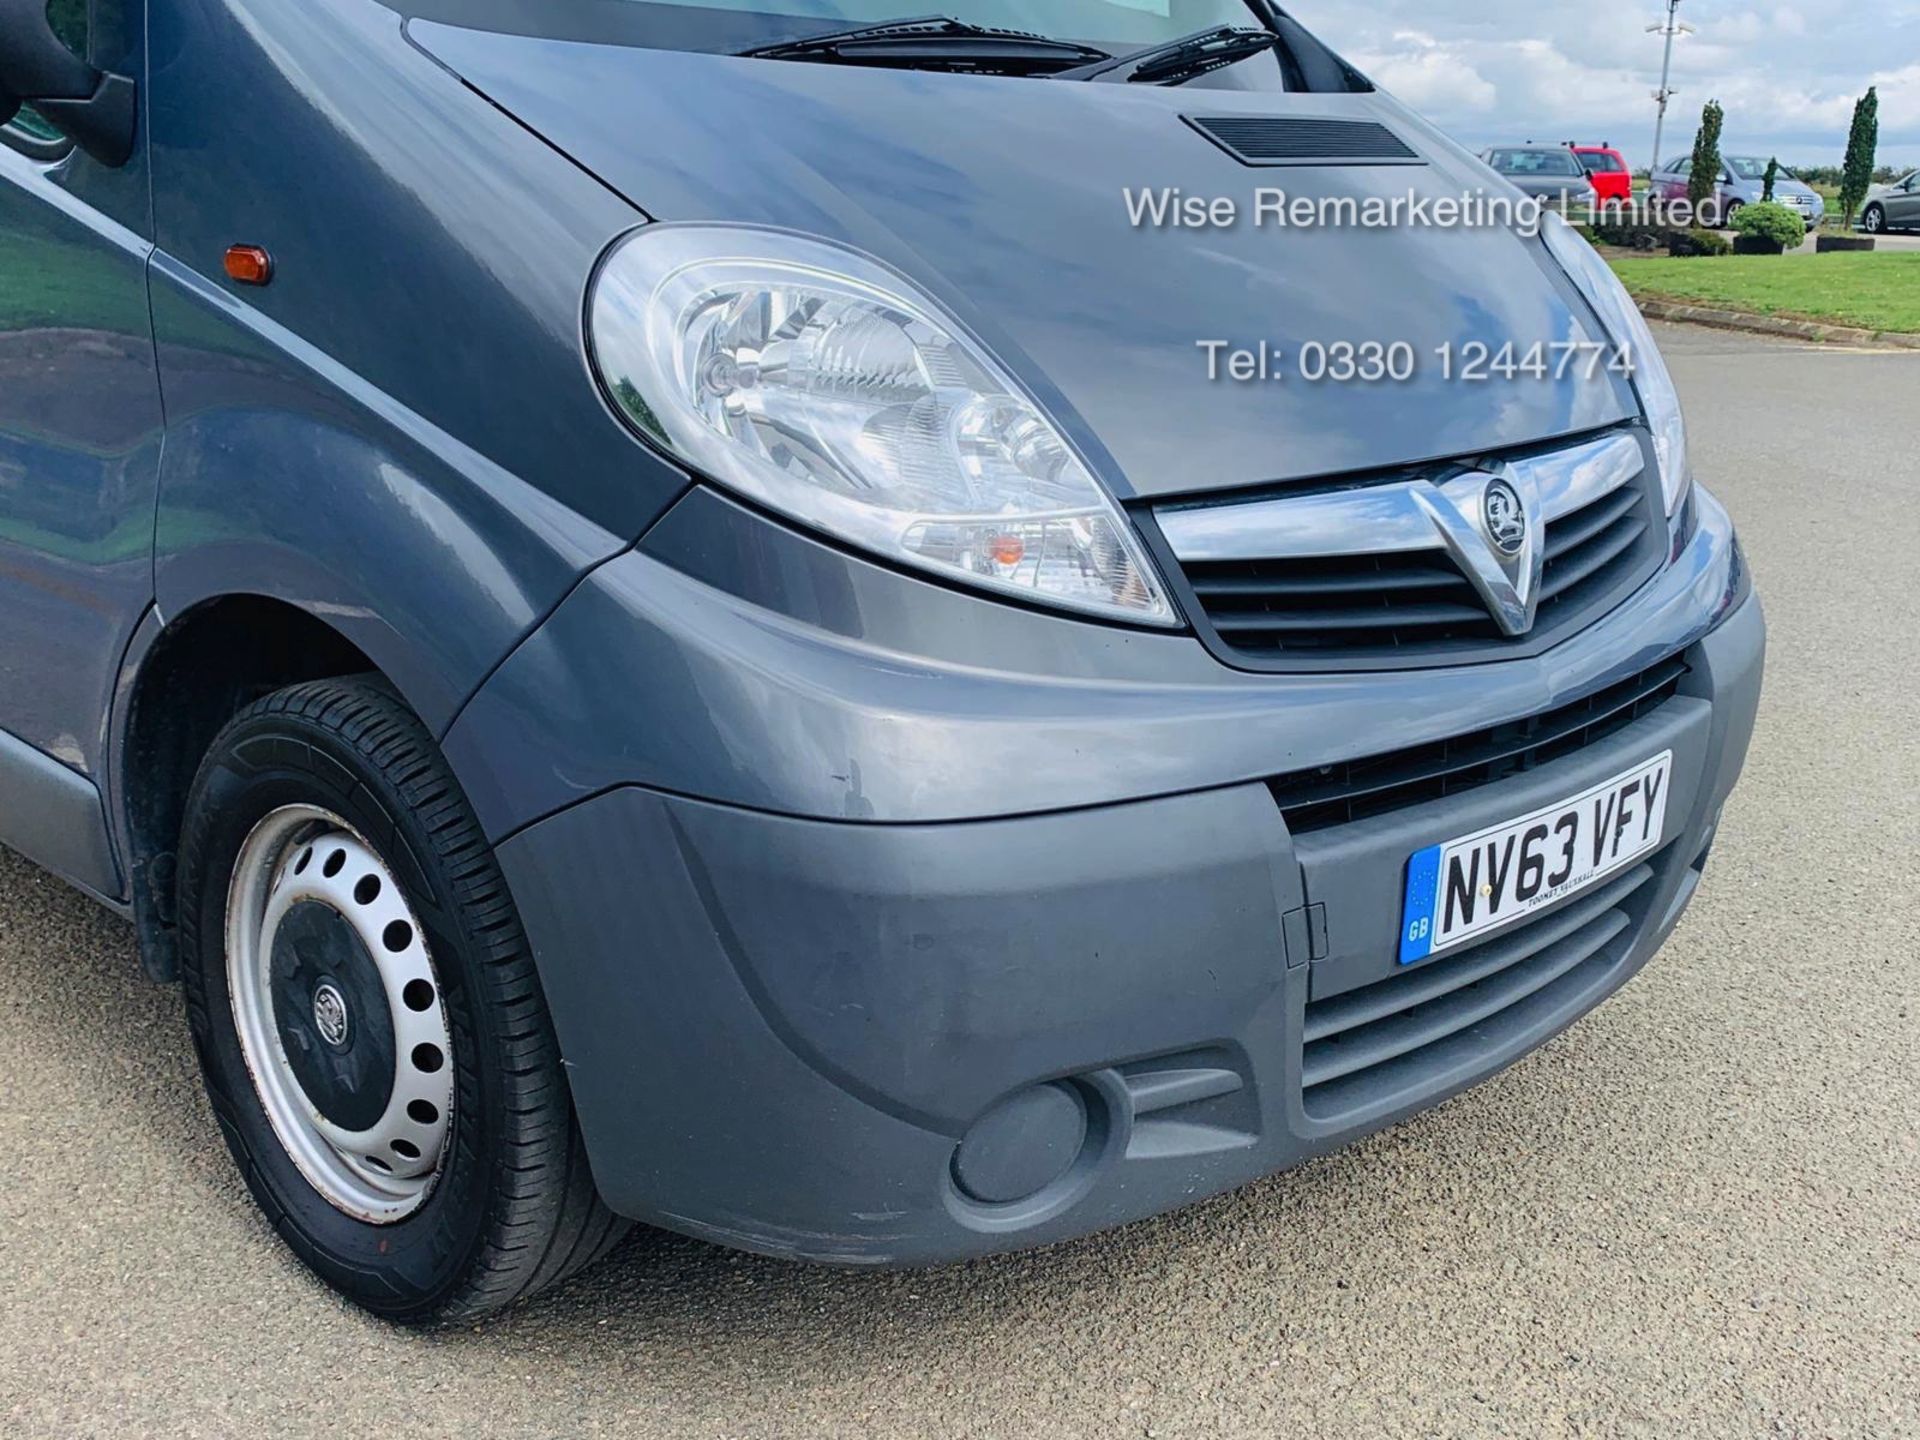 Vauxhall Vivaro 2.0 CDTI 2900 Minibus - 2014 Model - Wheel Chair Access -1 Owner From New -History - Image 5 of 21